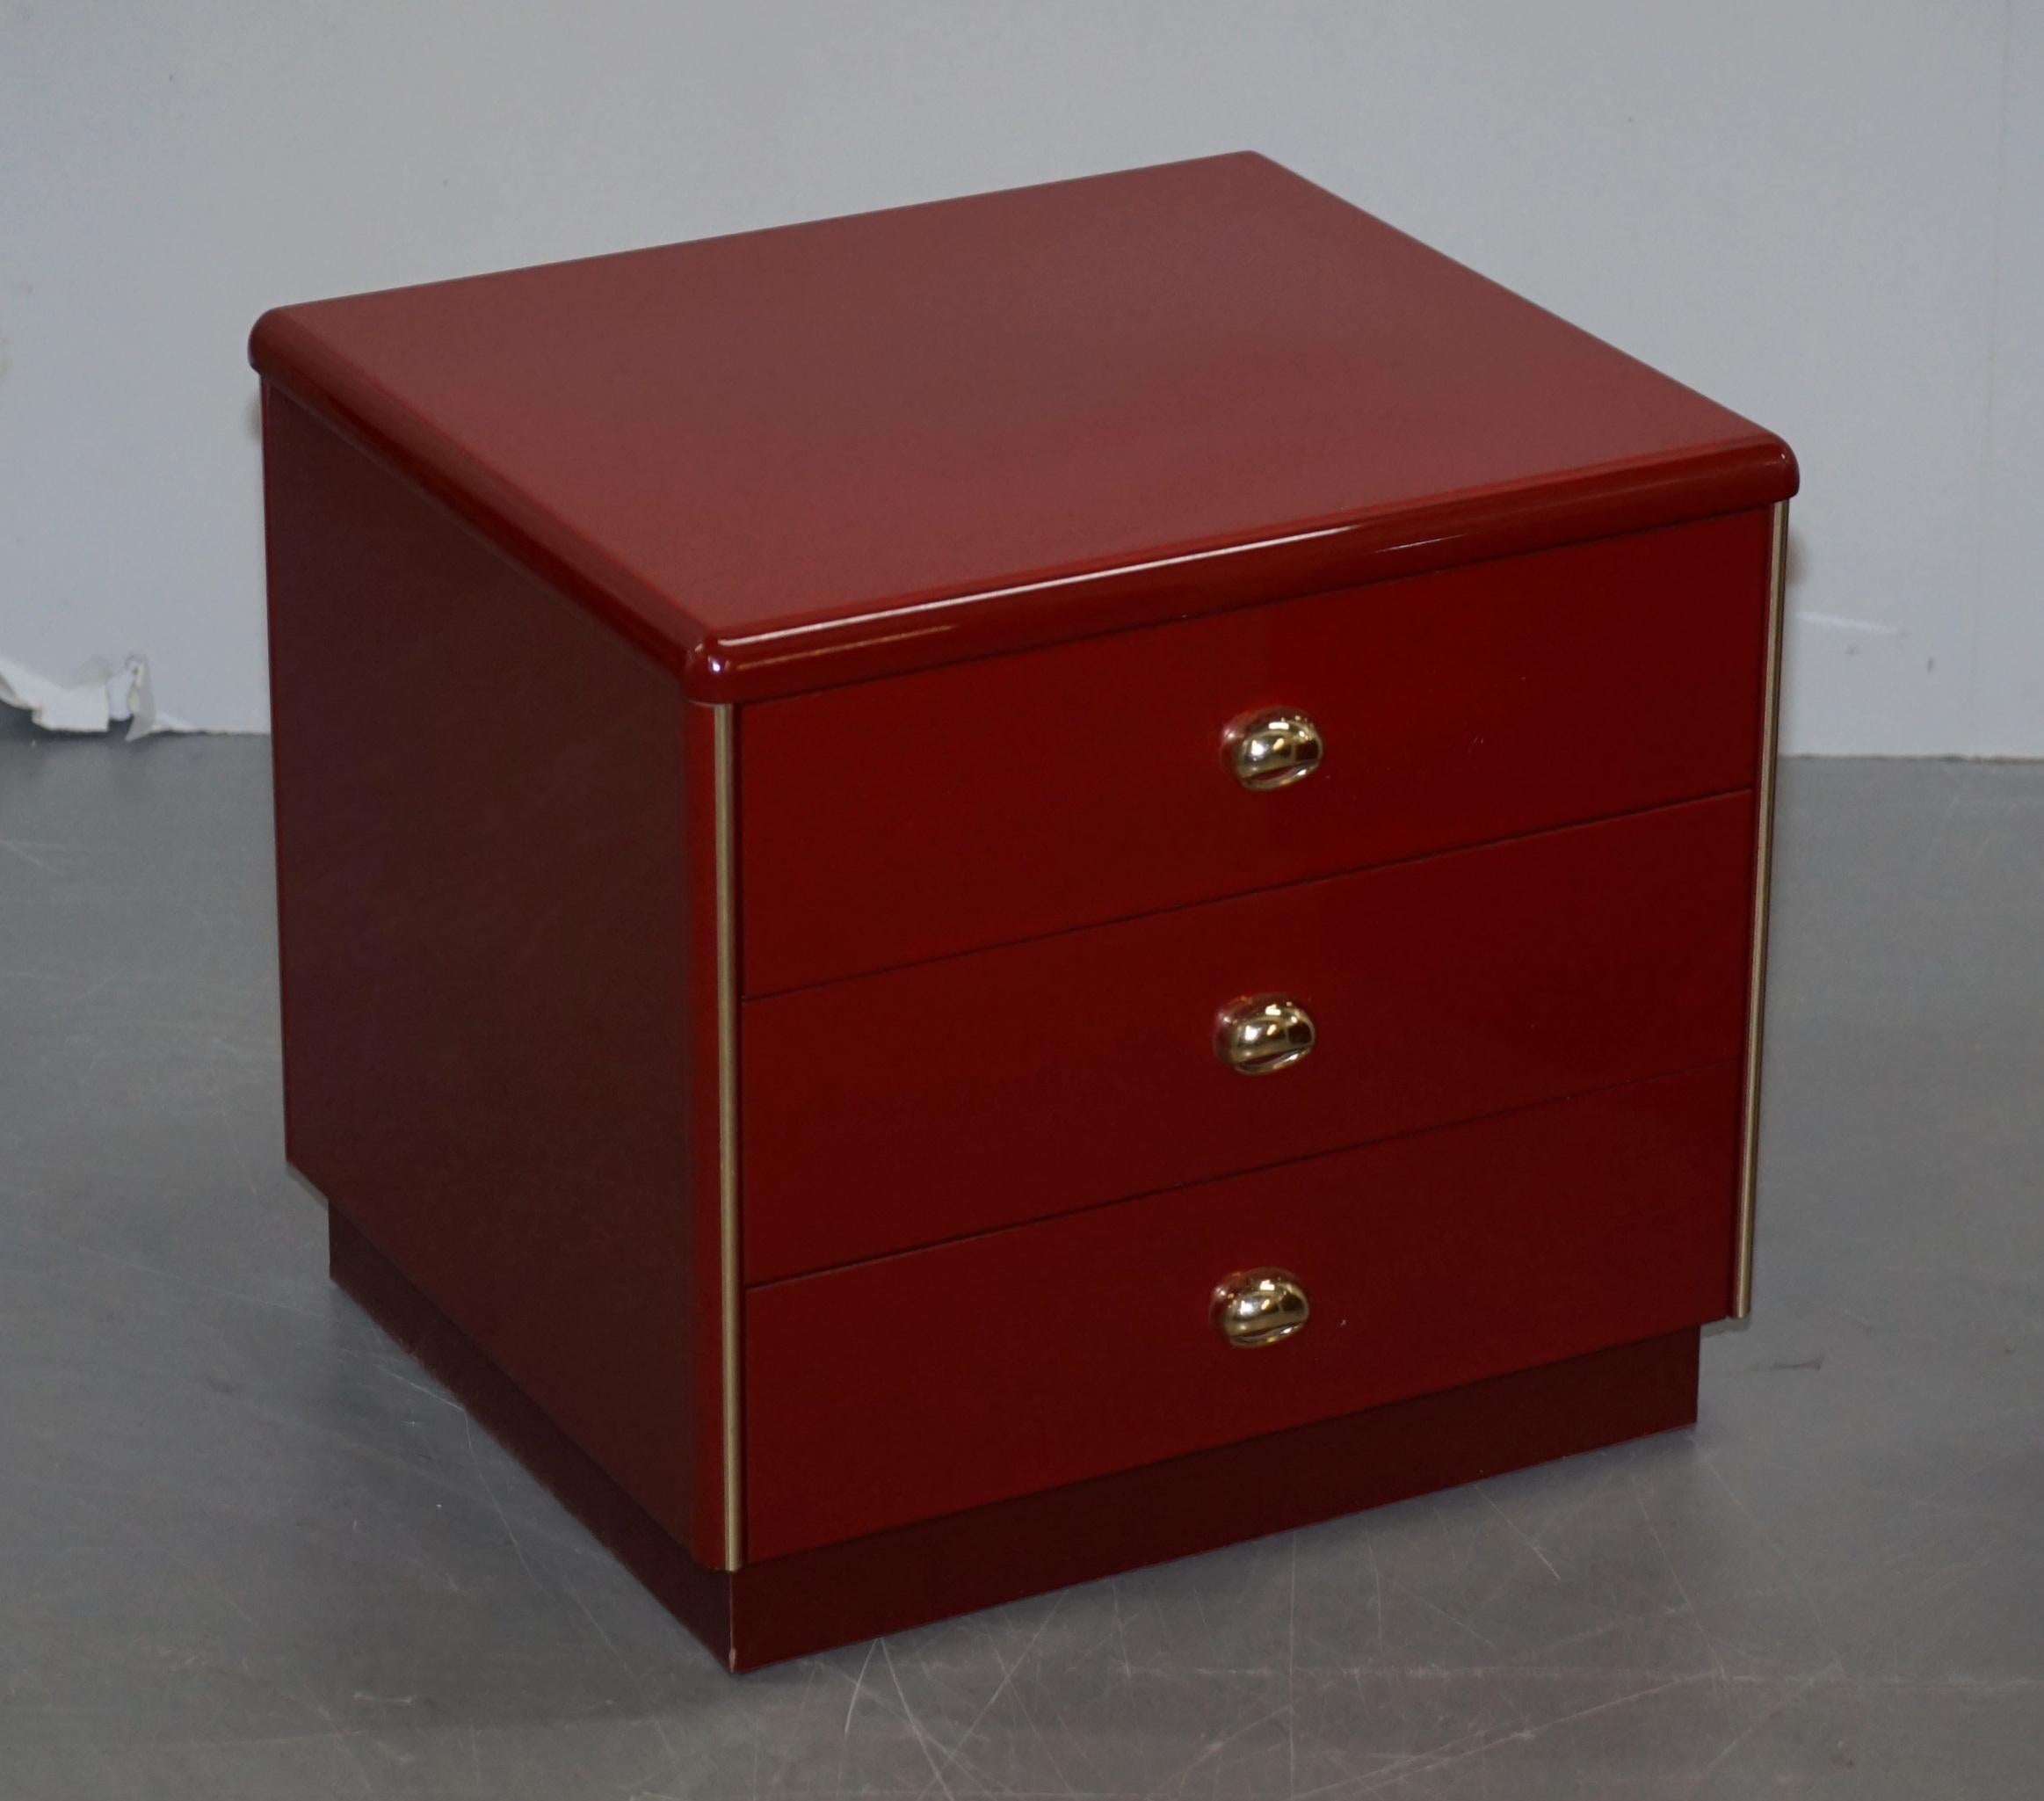 We are delighted to offer this seriously cool pair of Mid-Century Modern side table sized chest of drawers finished in red with gold hardware

These are very well made and good looking drawers, they look to be finished in some kind of Bakelite